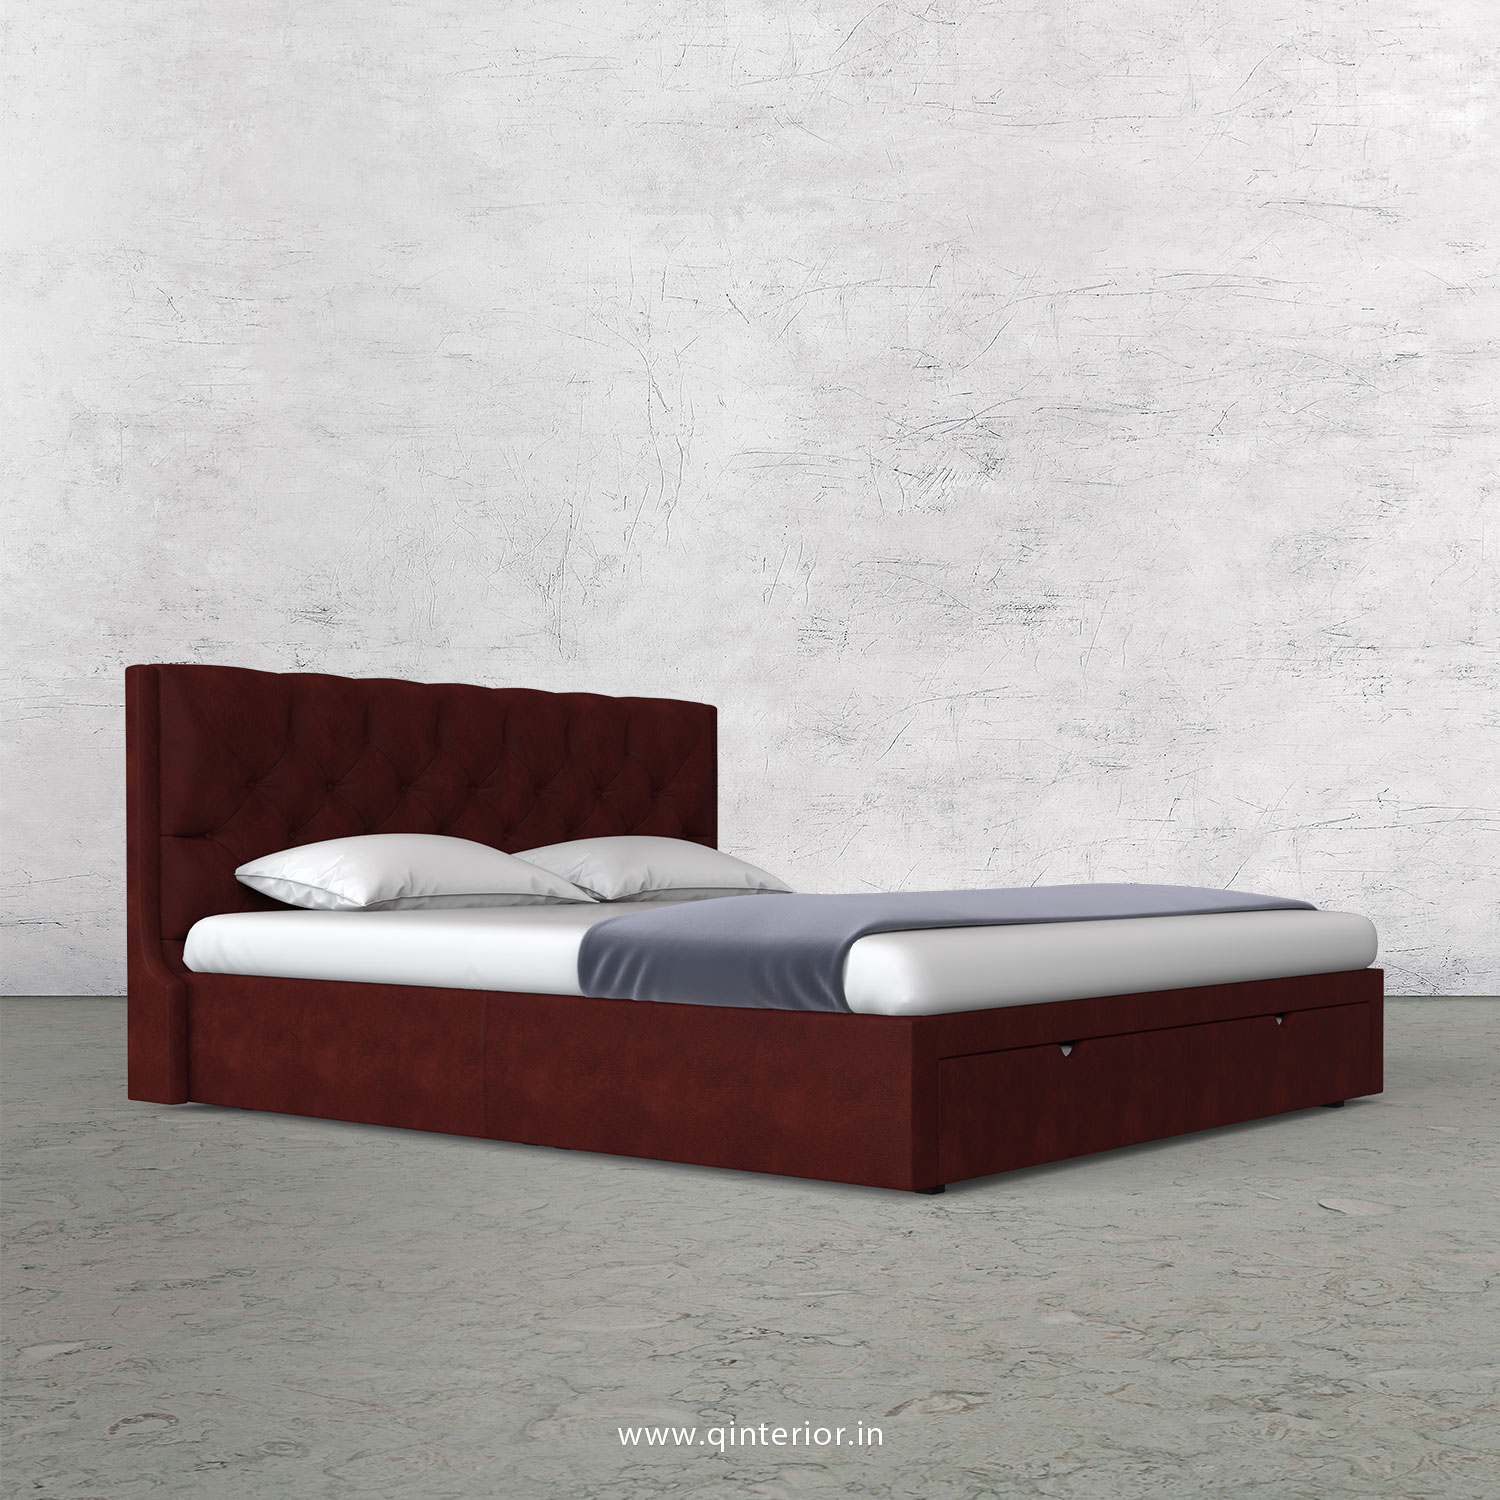 Scorpius Queen Storage Bed in Fab Leather Fabric - QBD001 FL17